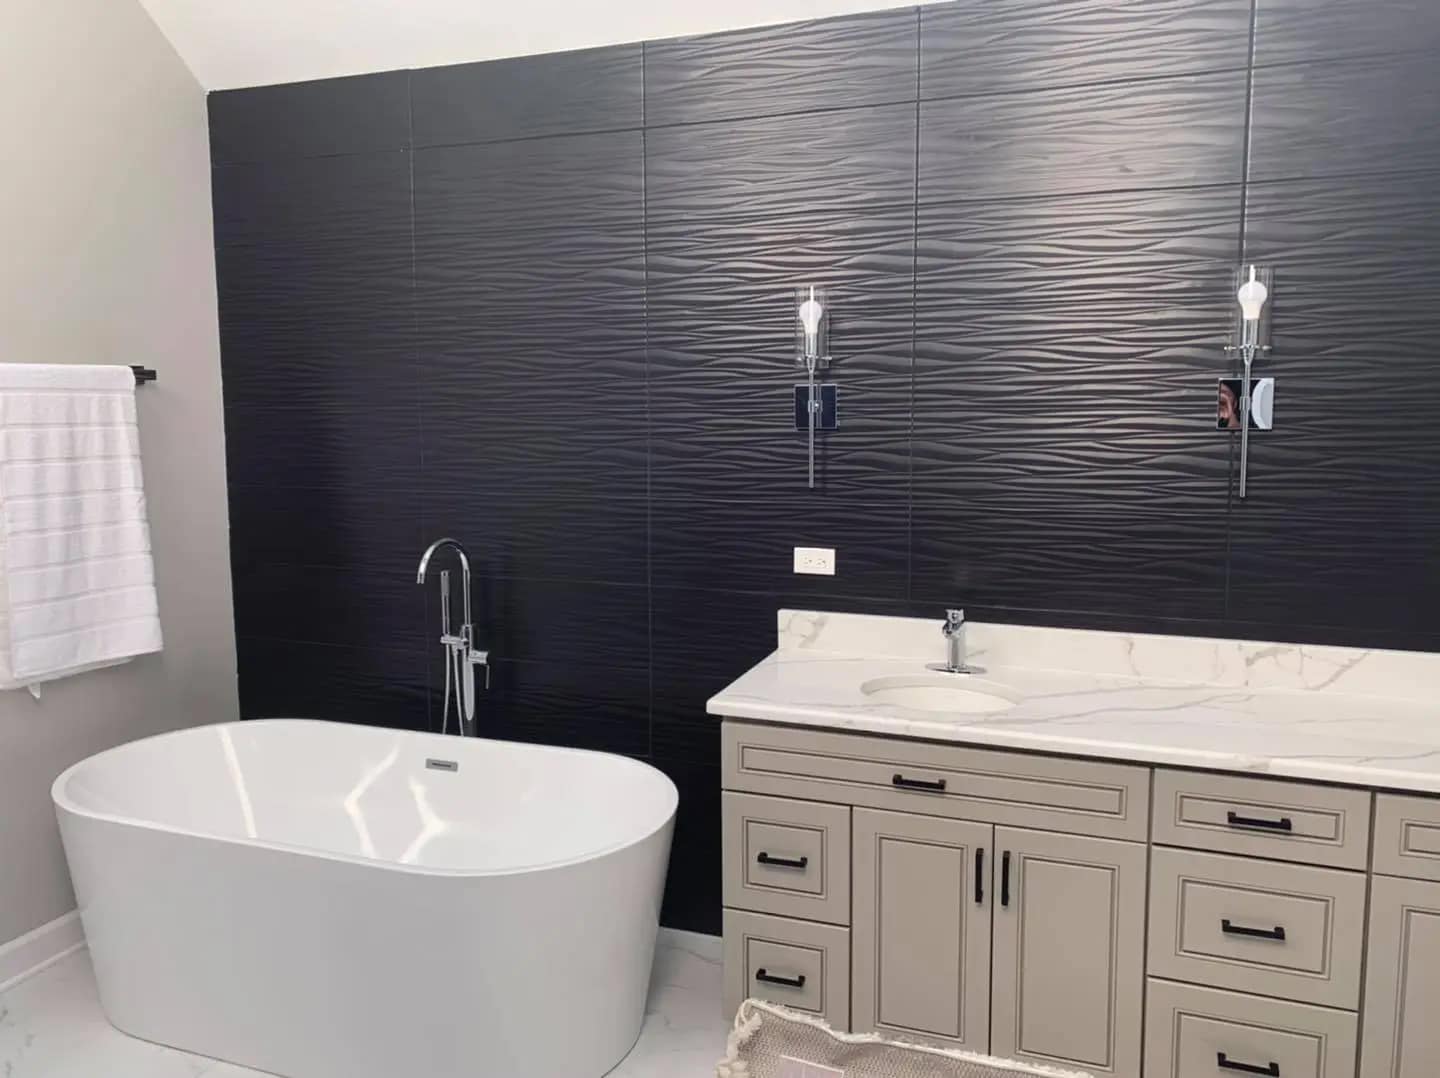 Plano IL Home Remodeling - Bathroom Remodel - 360 Improvements